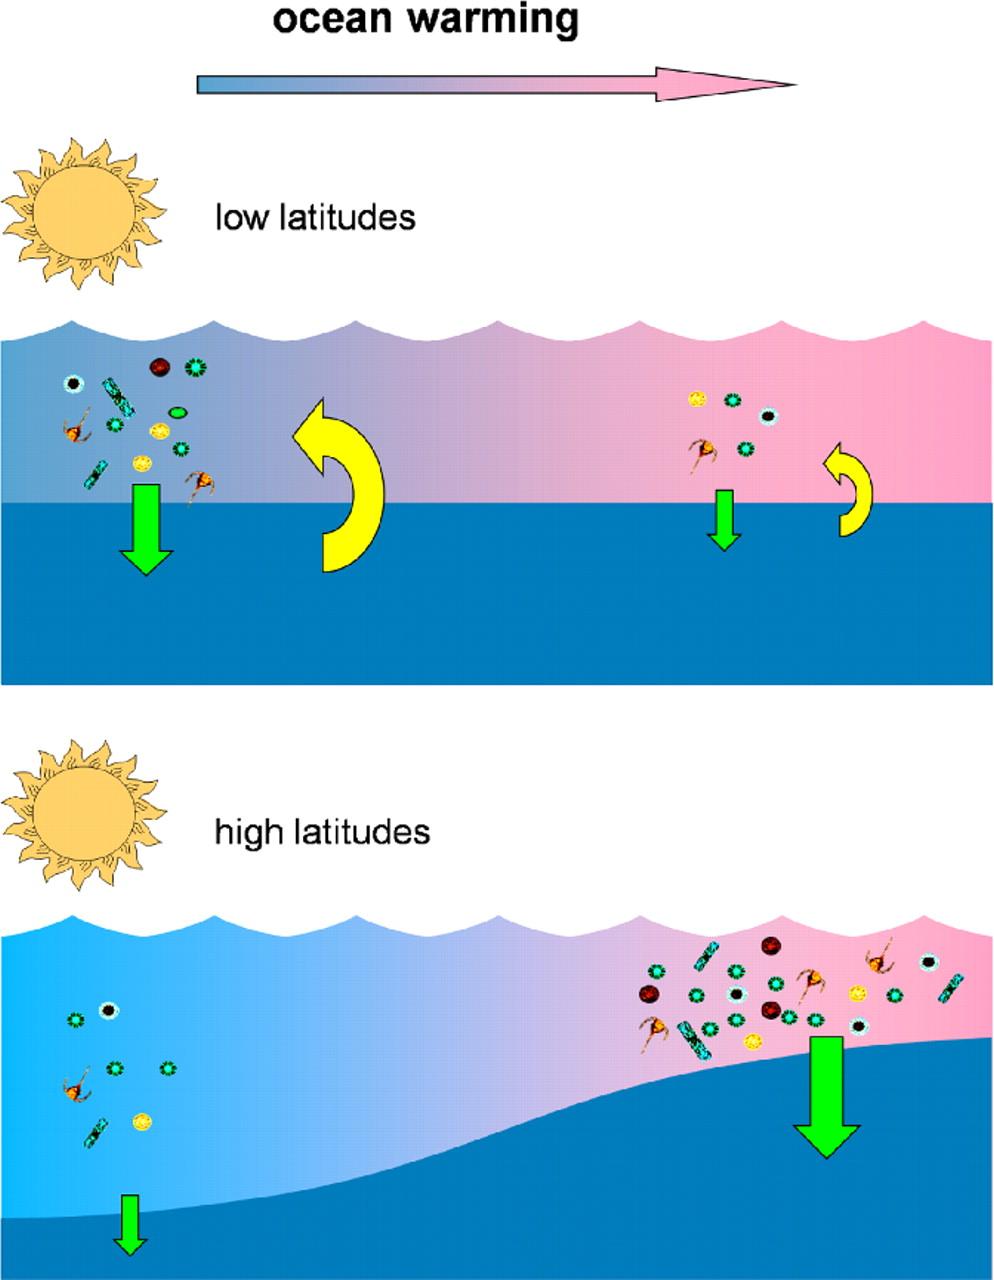 Schematic model illustrating the effect of sea-surface warming on upper-ocean processes in low (Upper) and high (Lower) latitudes.